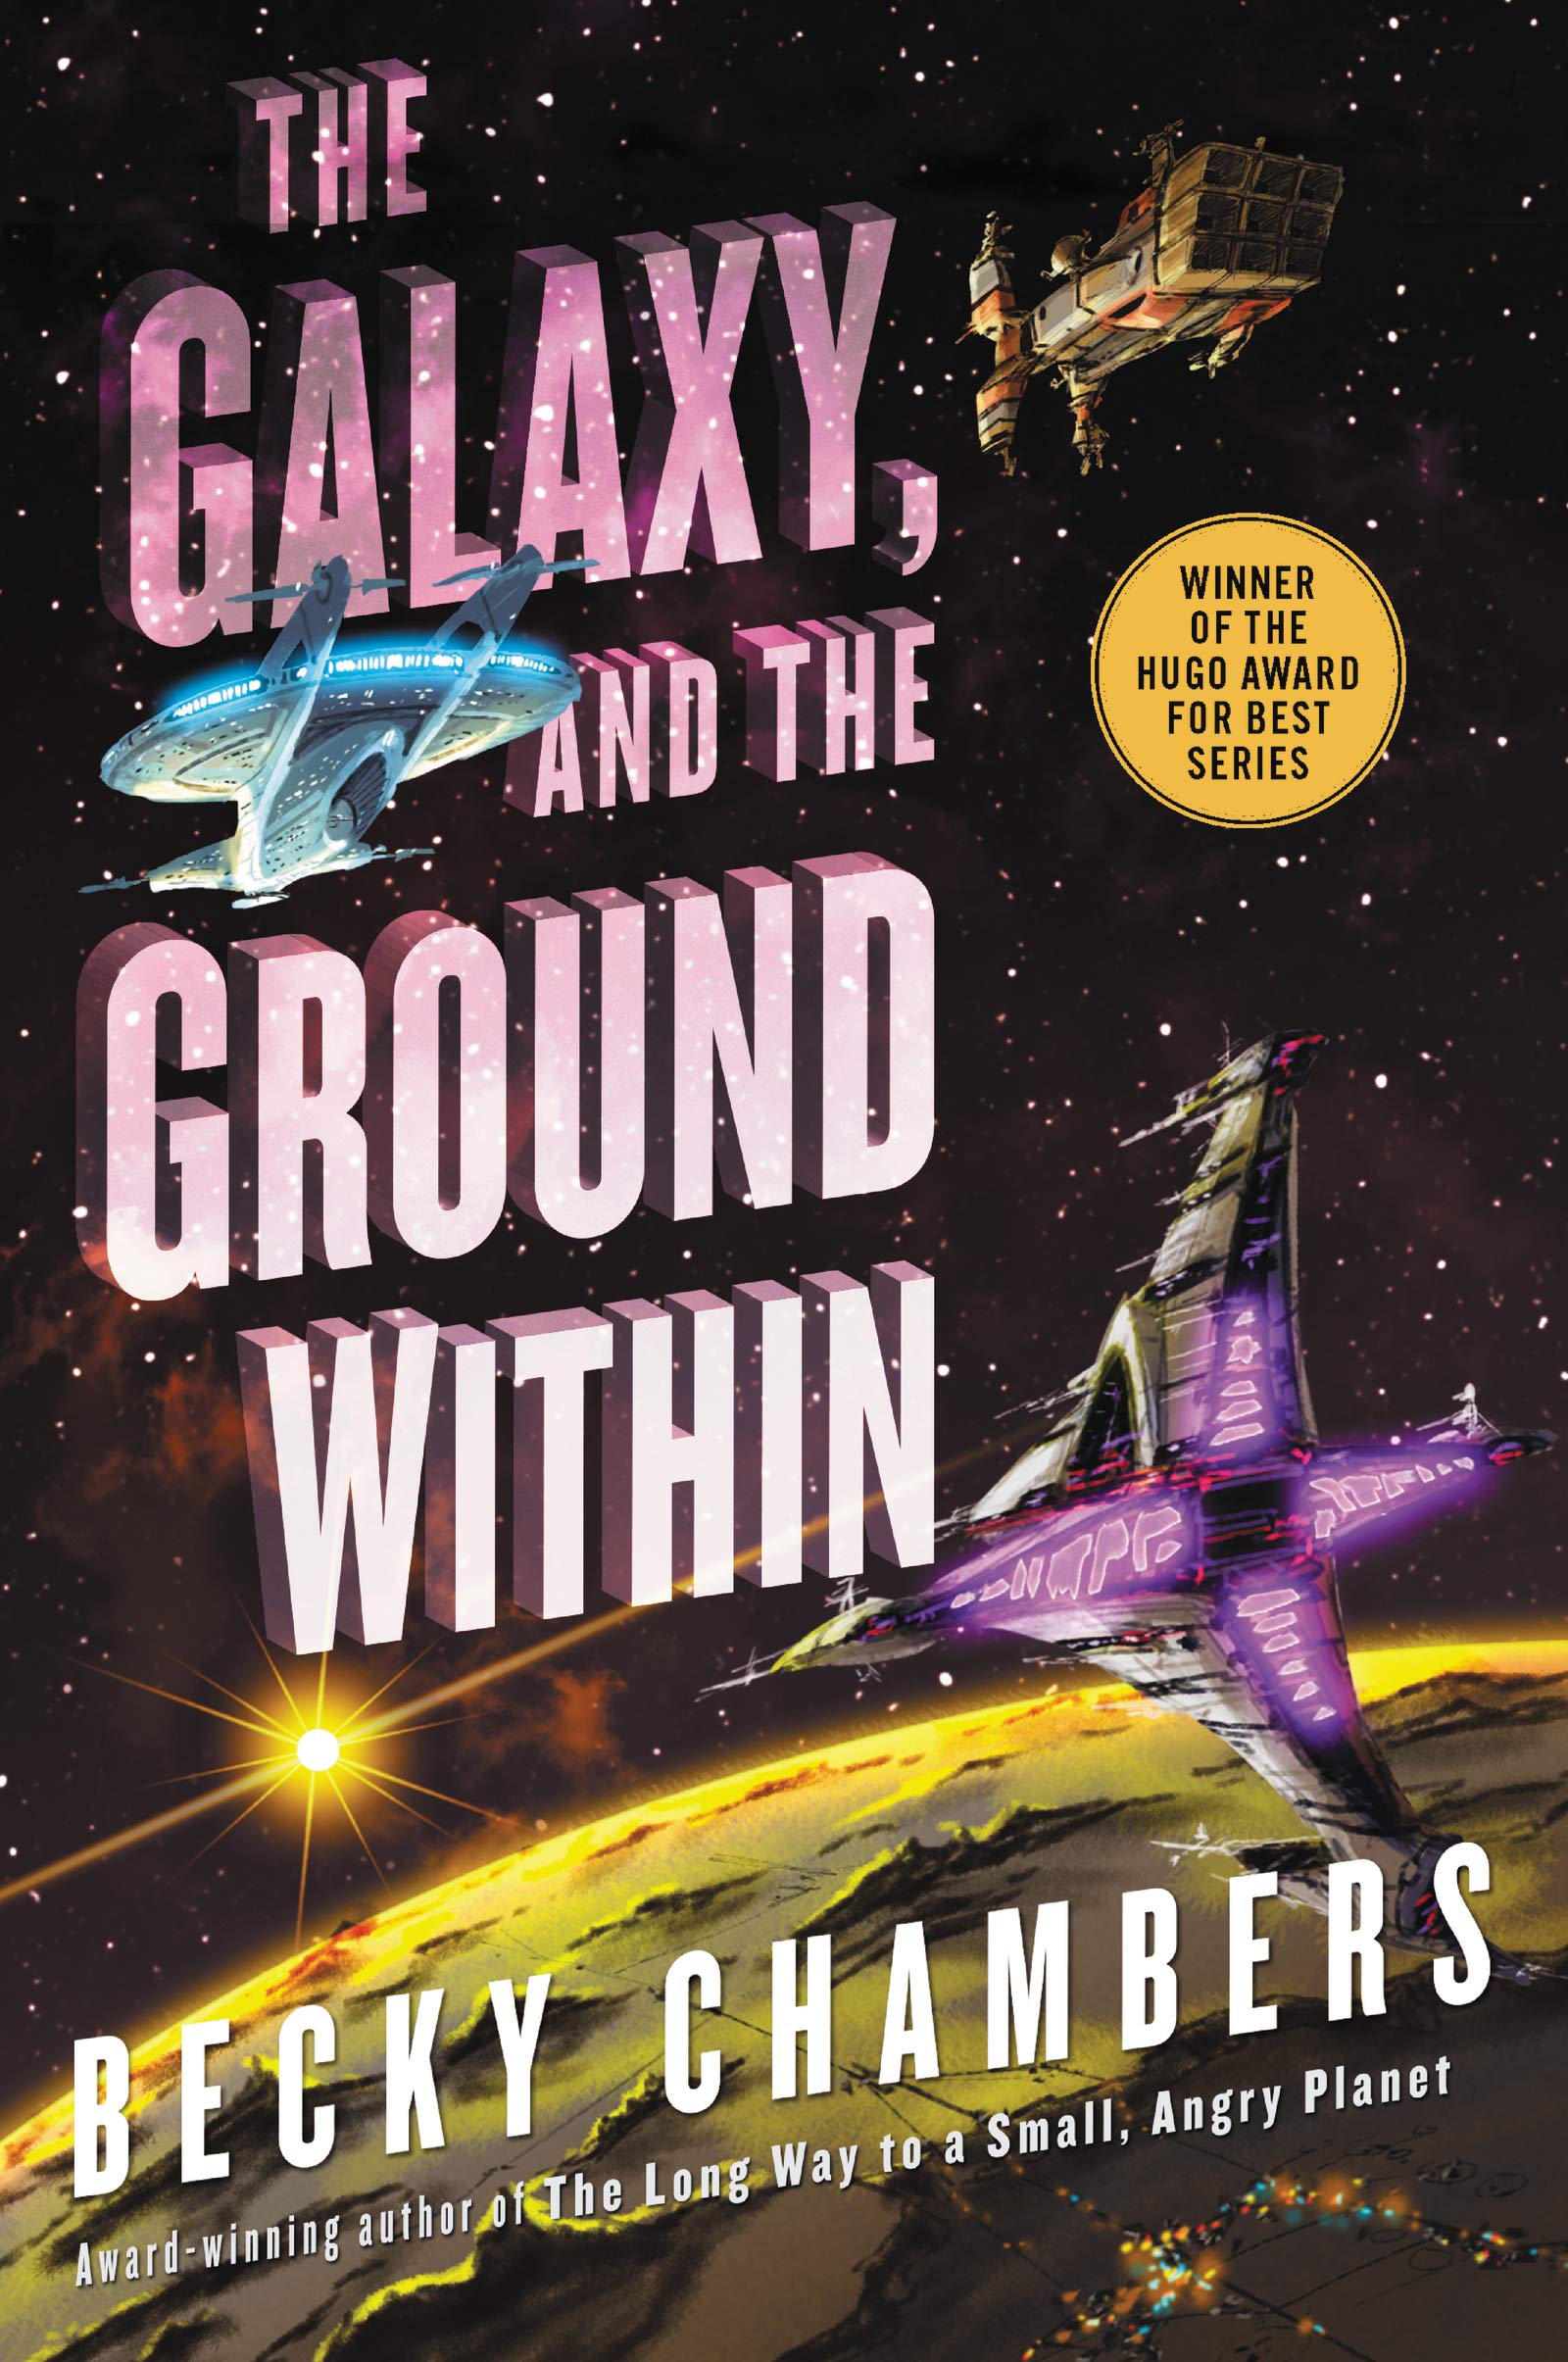 Becky Chambers: The Galaxy, and the Ground Within (EBook, 2021, HarperCollins Publishers)